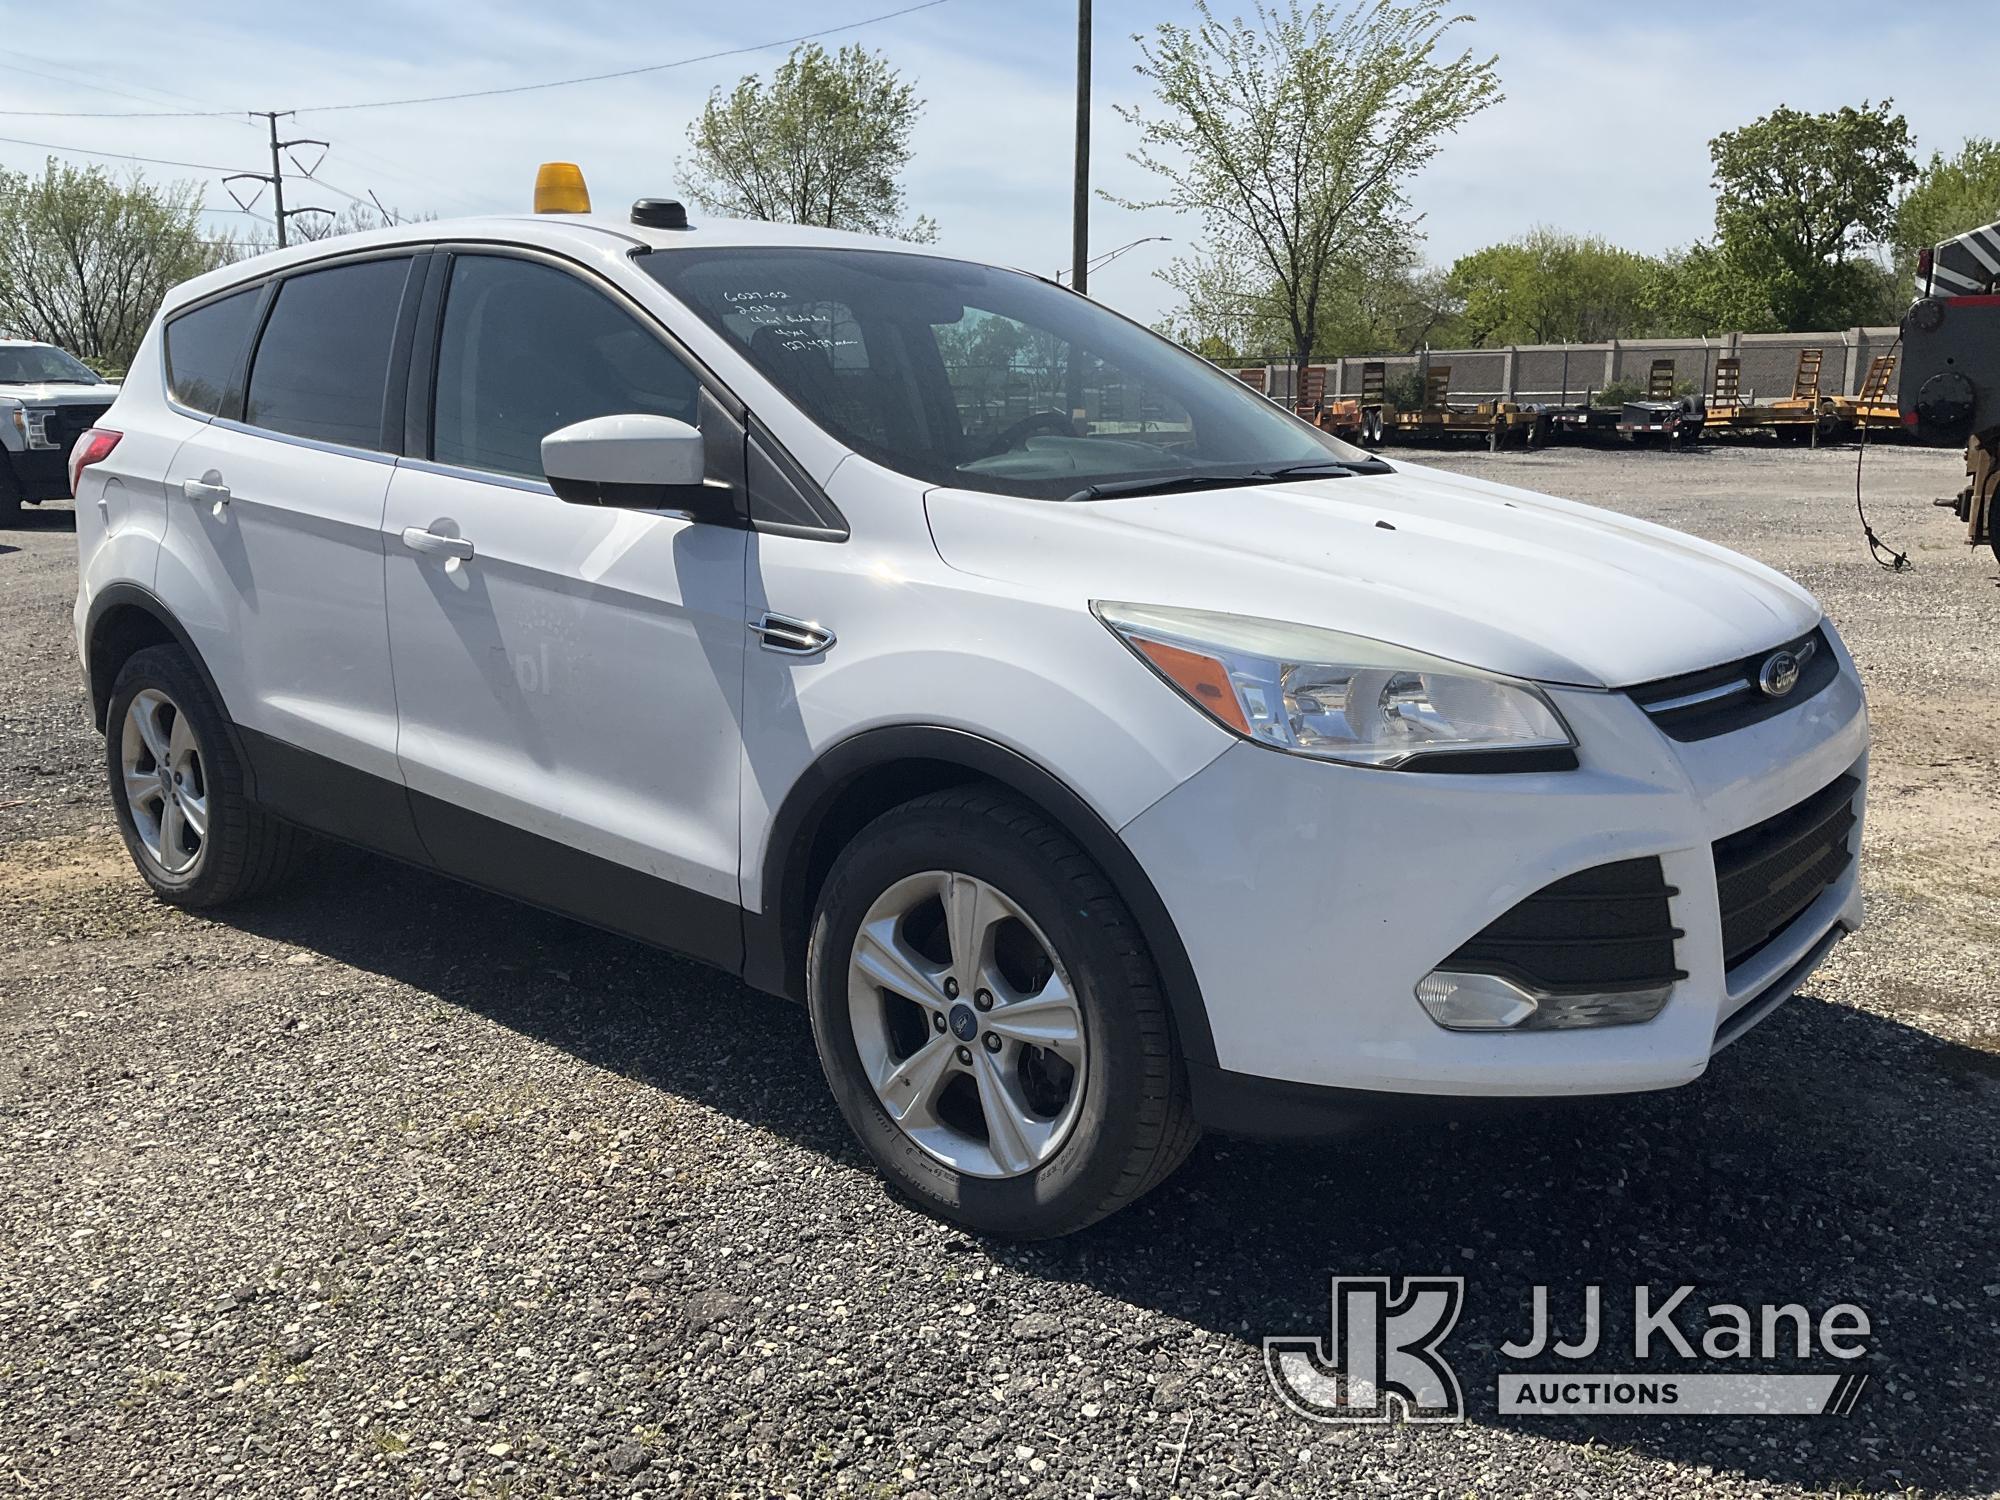 (Plymouth Meeting, PA) 2013 Ford Escape 4x4 4-Door Sport Utility Vehicle Runs & Moves, Body & Rust D